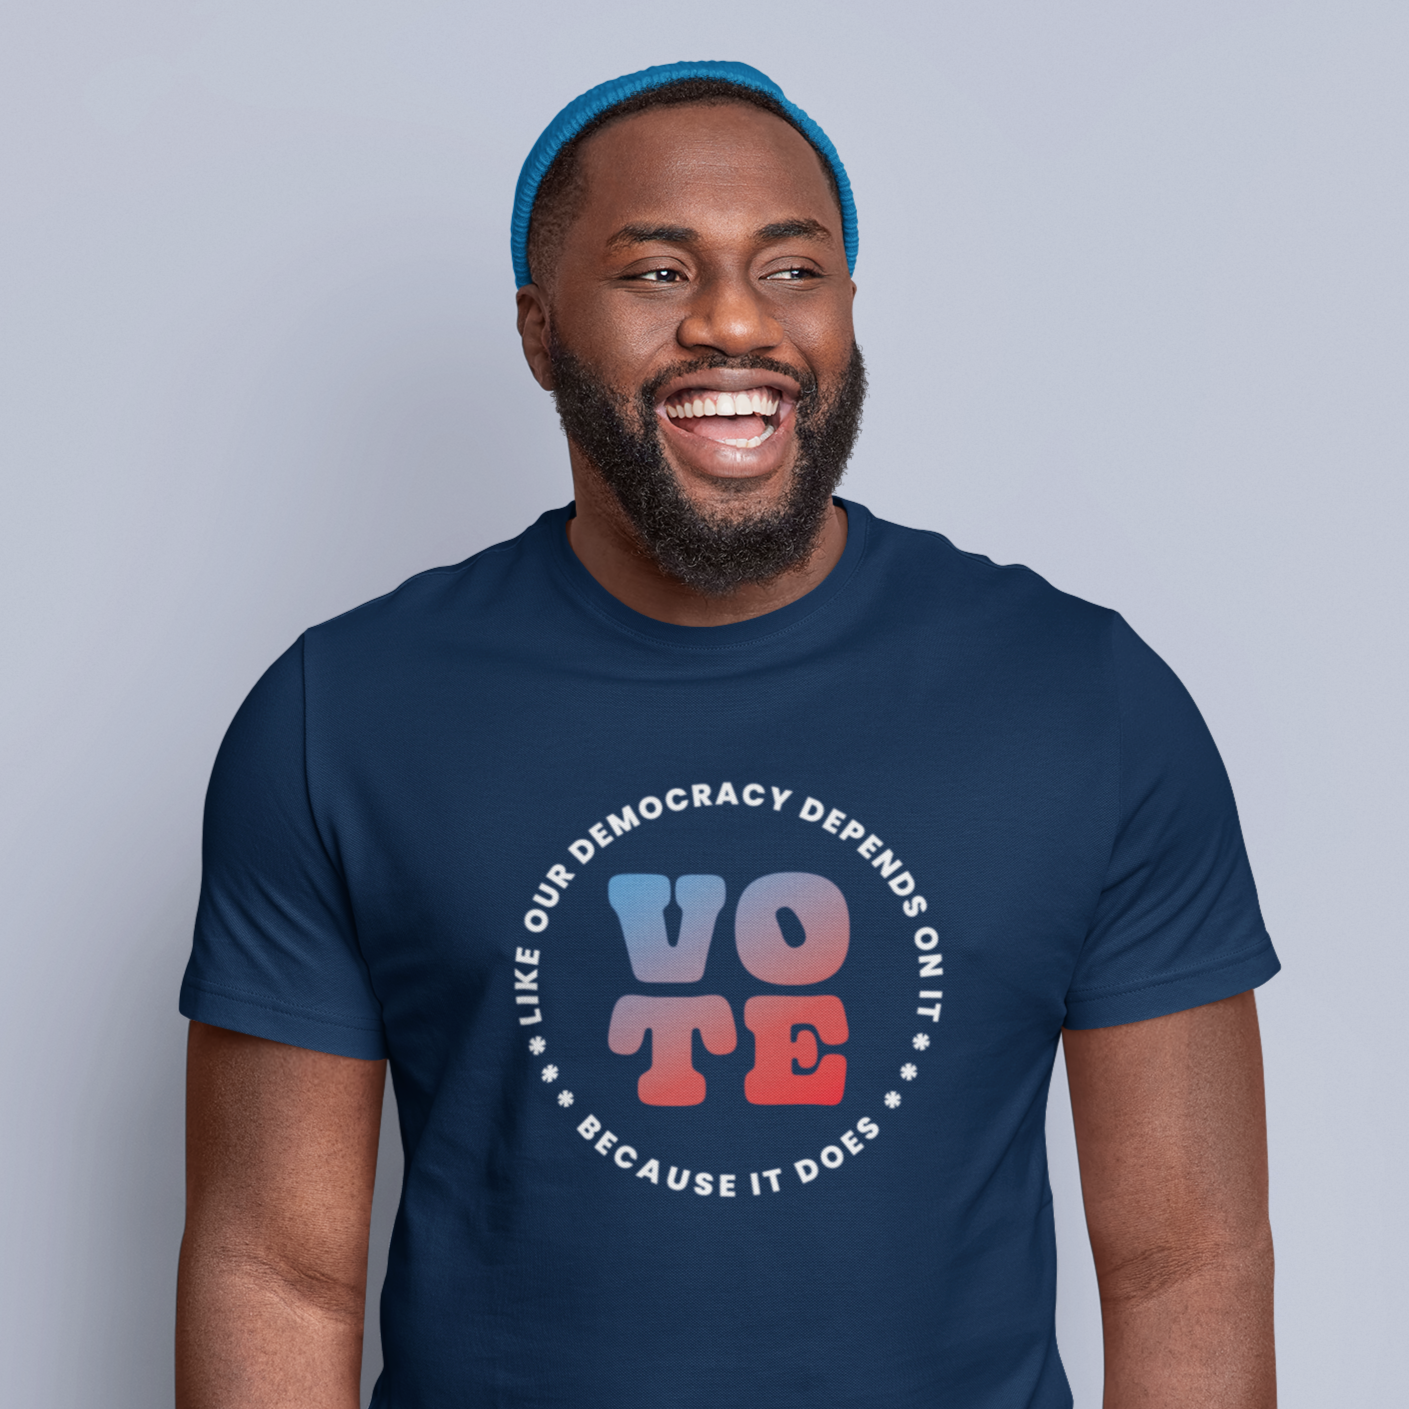 Vote Like Our Democracy Depends On It T-Shirt